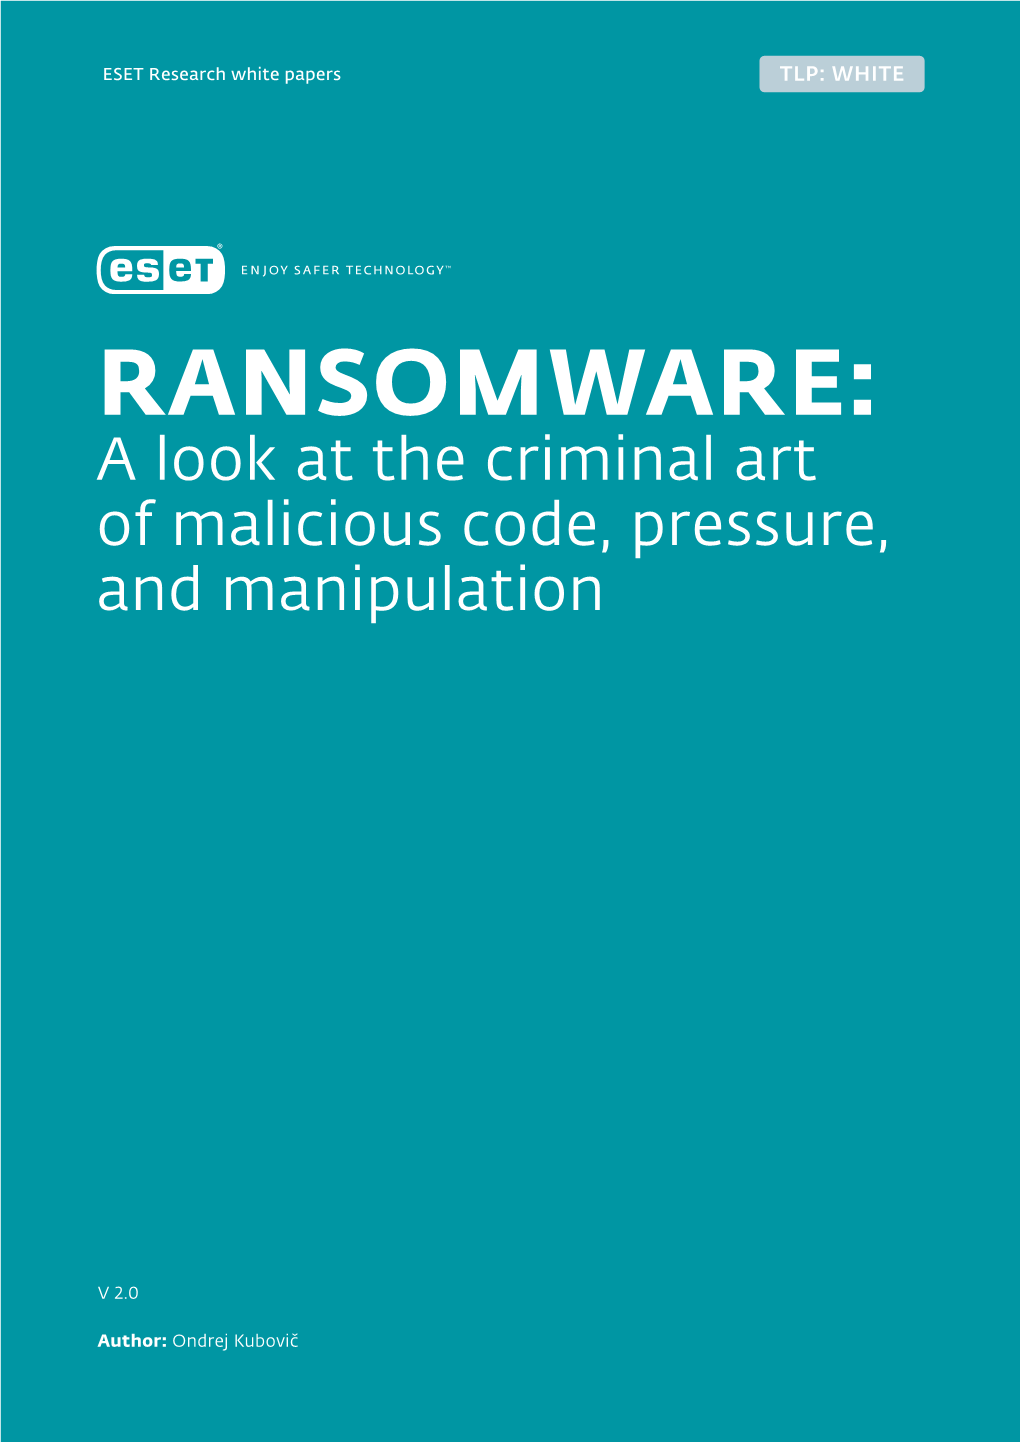 RANSOMWARE: a Look at the Criminal Art of Malicious Code, Pressure, and Manipulation